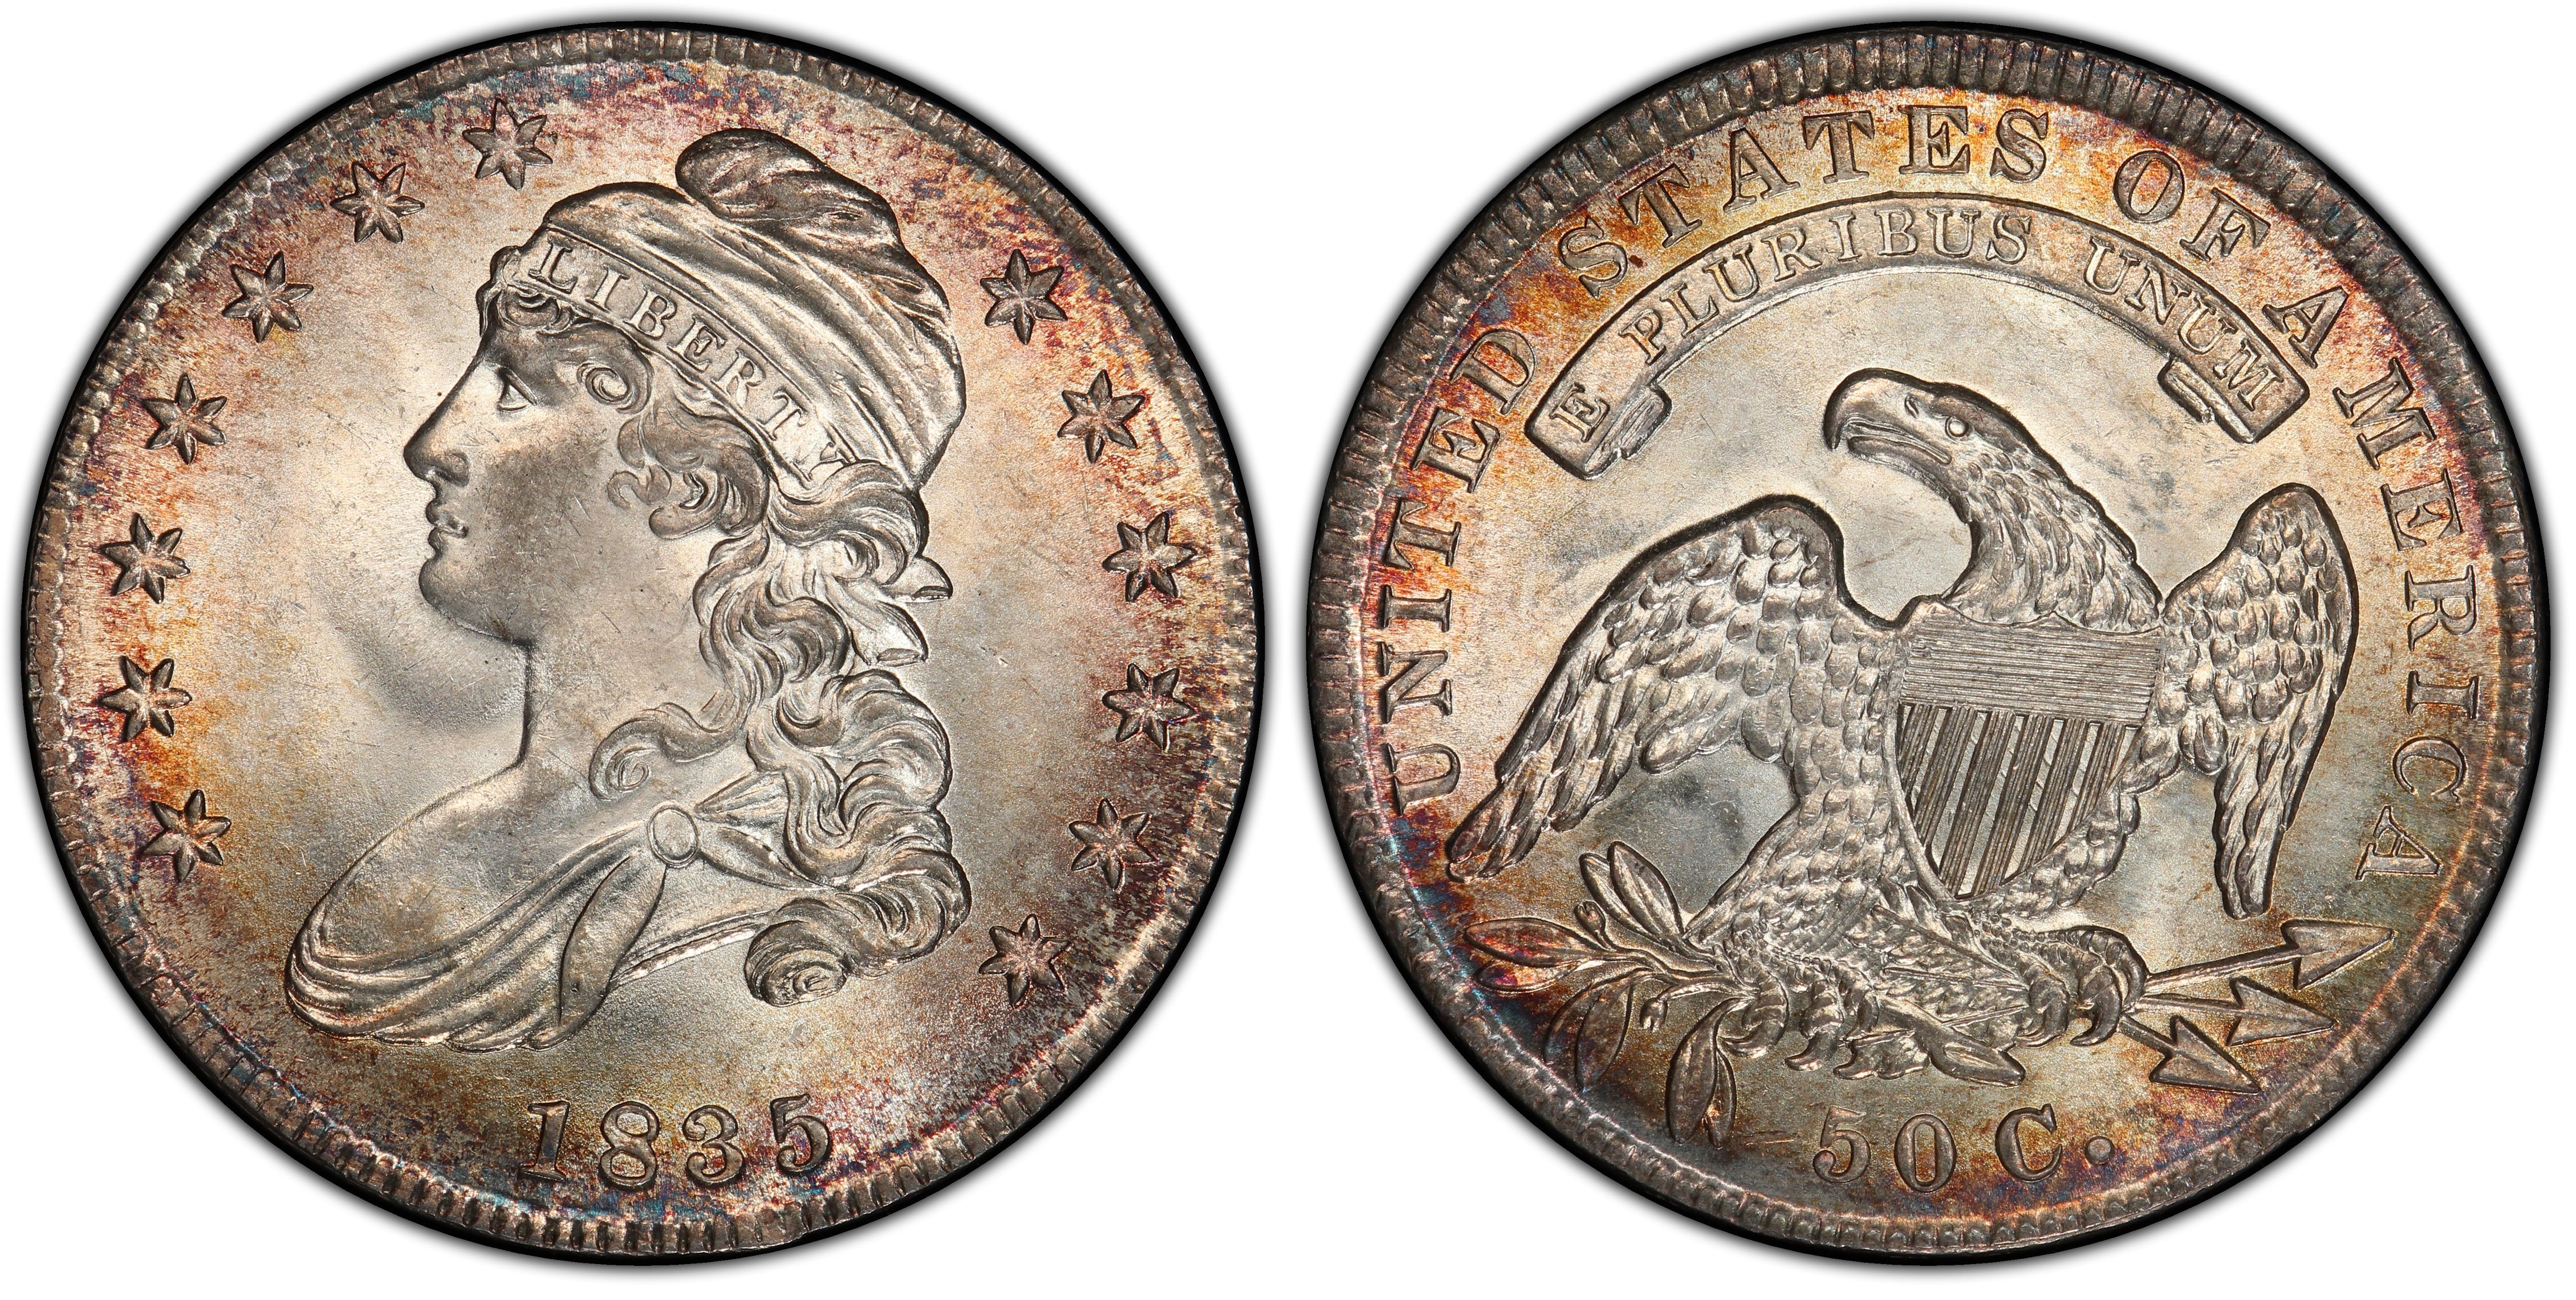 1835 50C (Regular Strike) Capped Bust Half Dollar - PCGS CoinFacts